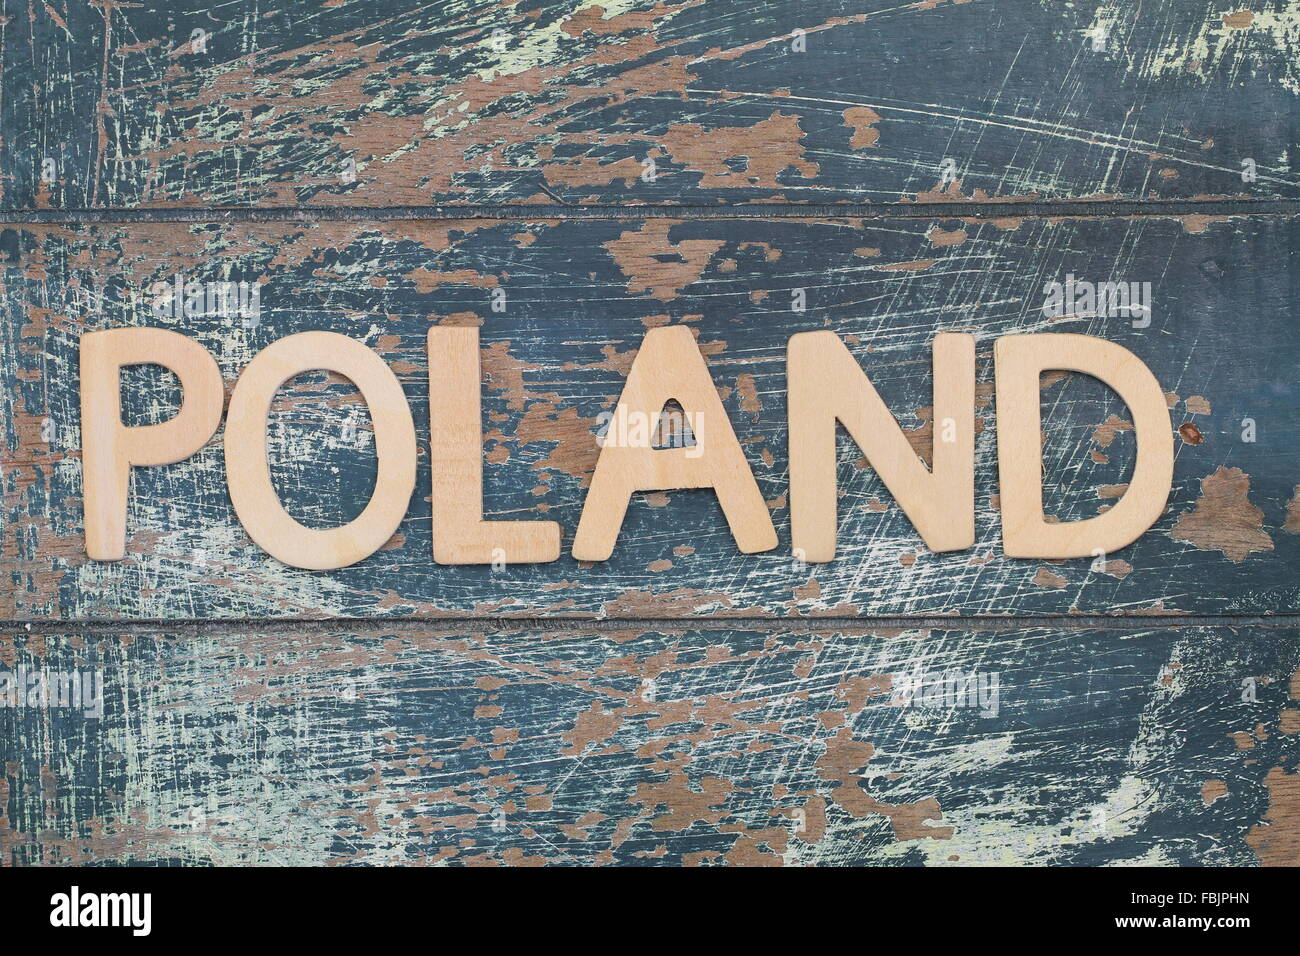 Poland written with wooden letters on rustic surface Stock Photo